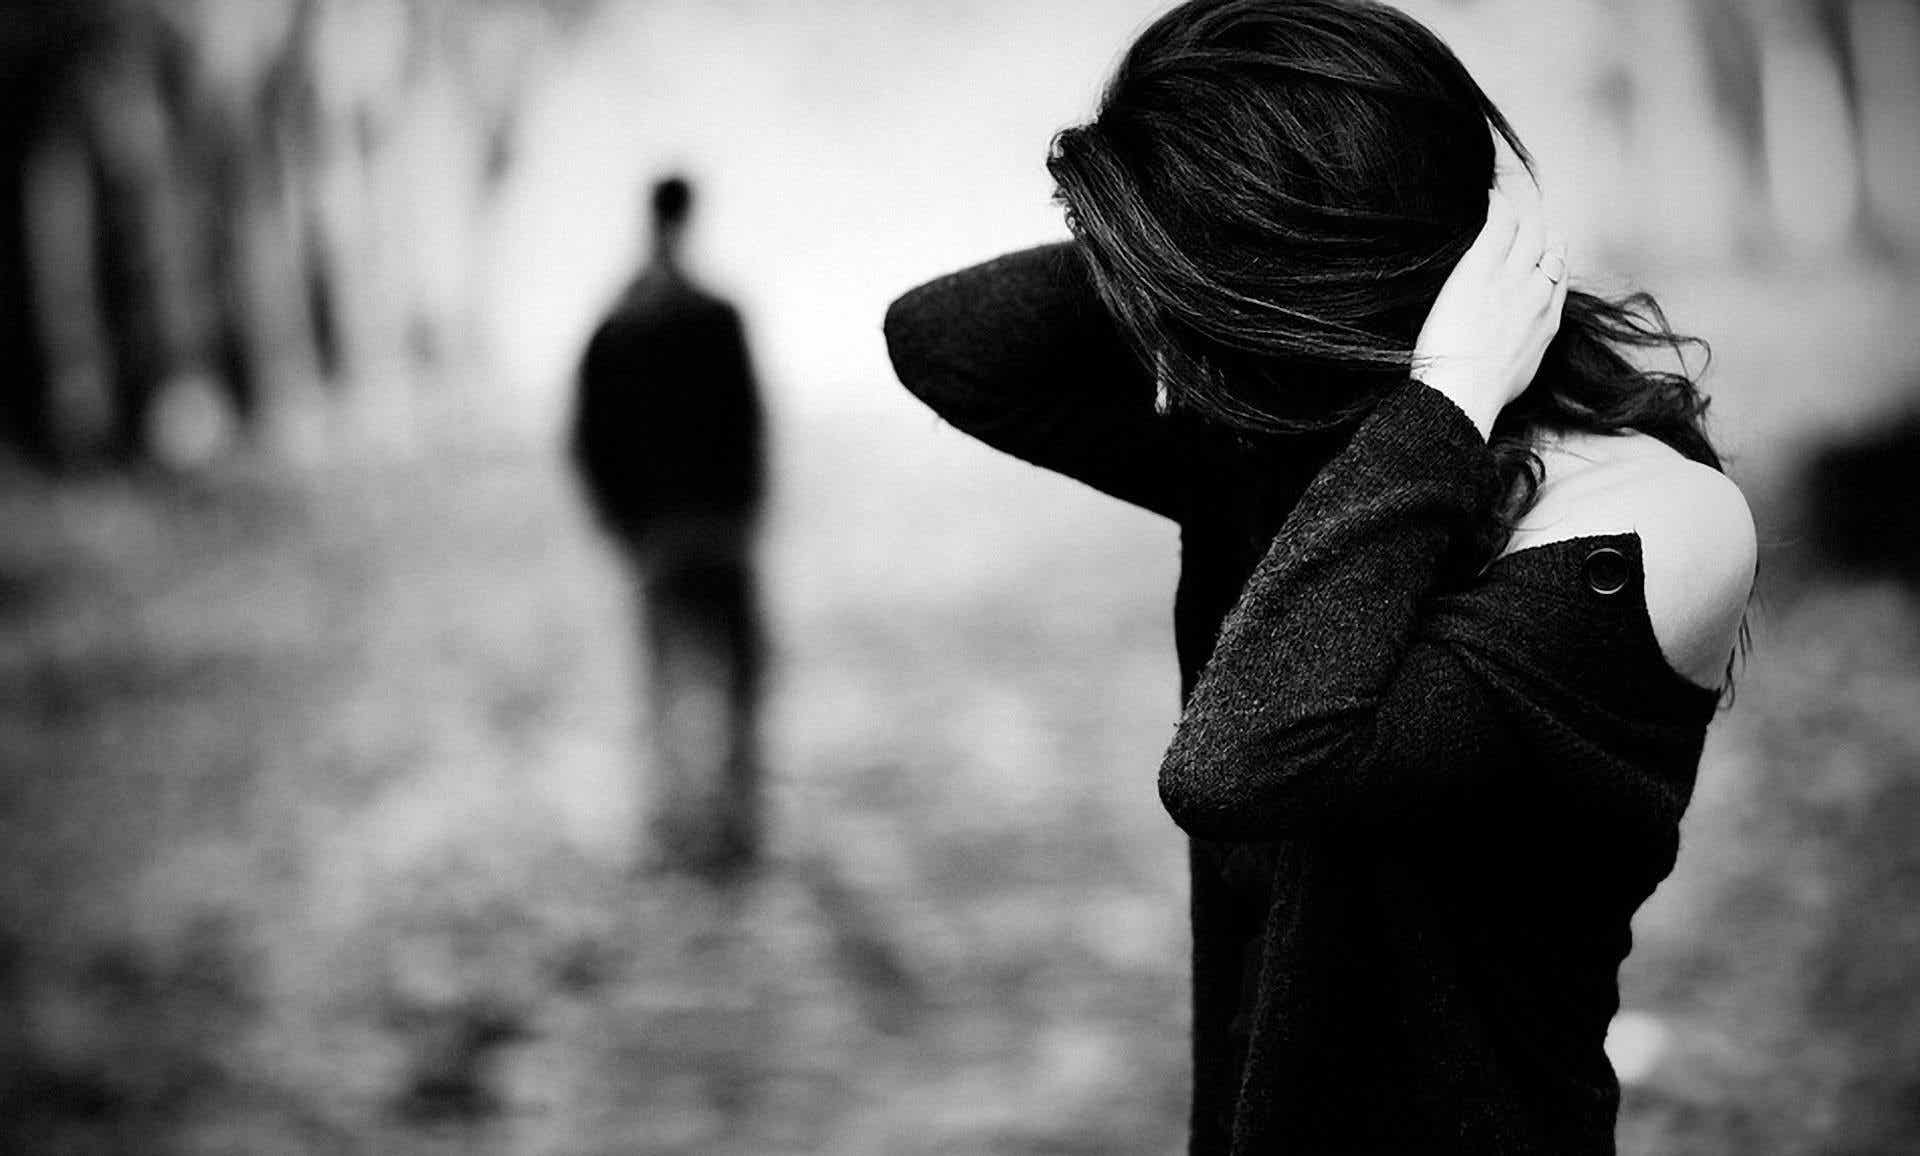 A black and white photo of a man walking away from a woman.